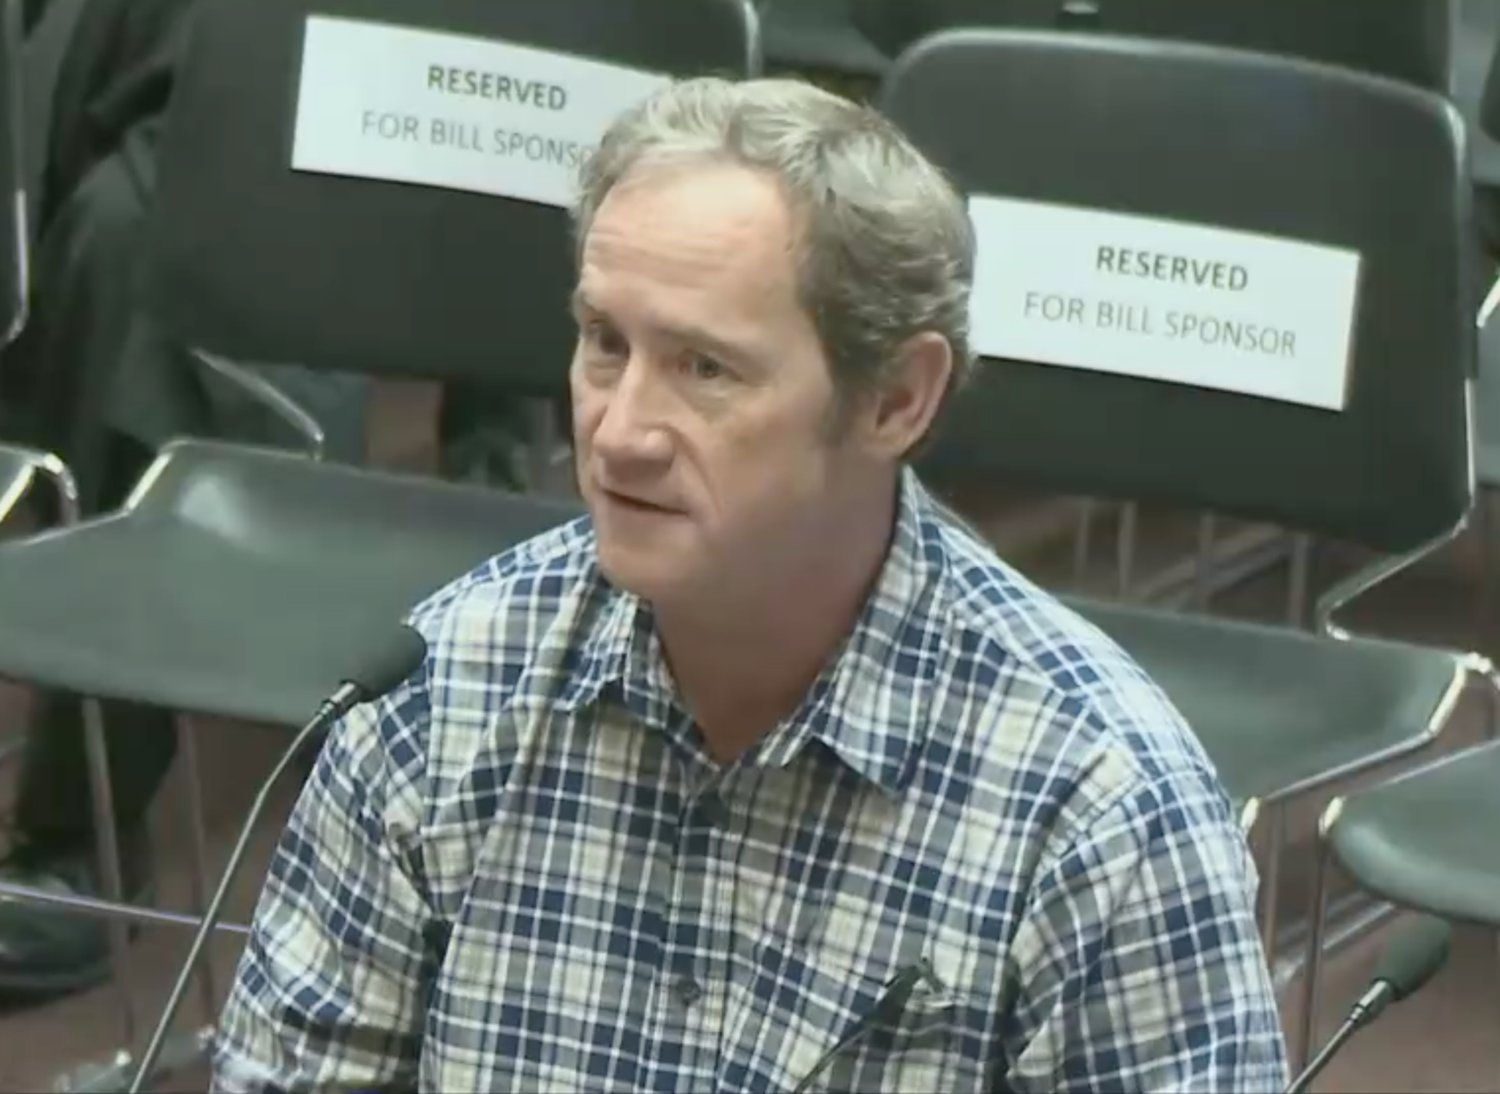 Little Compton resident John Bowen, who with brother Patrick has proposed an oyster farm at the Sapowet Marsh, implored the House Corporations subcommittee last week to reject the bill and see it for what it is — "an attempt by the wealthy to control what  they don't own."